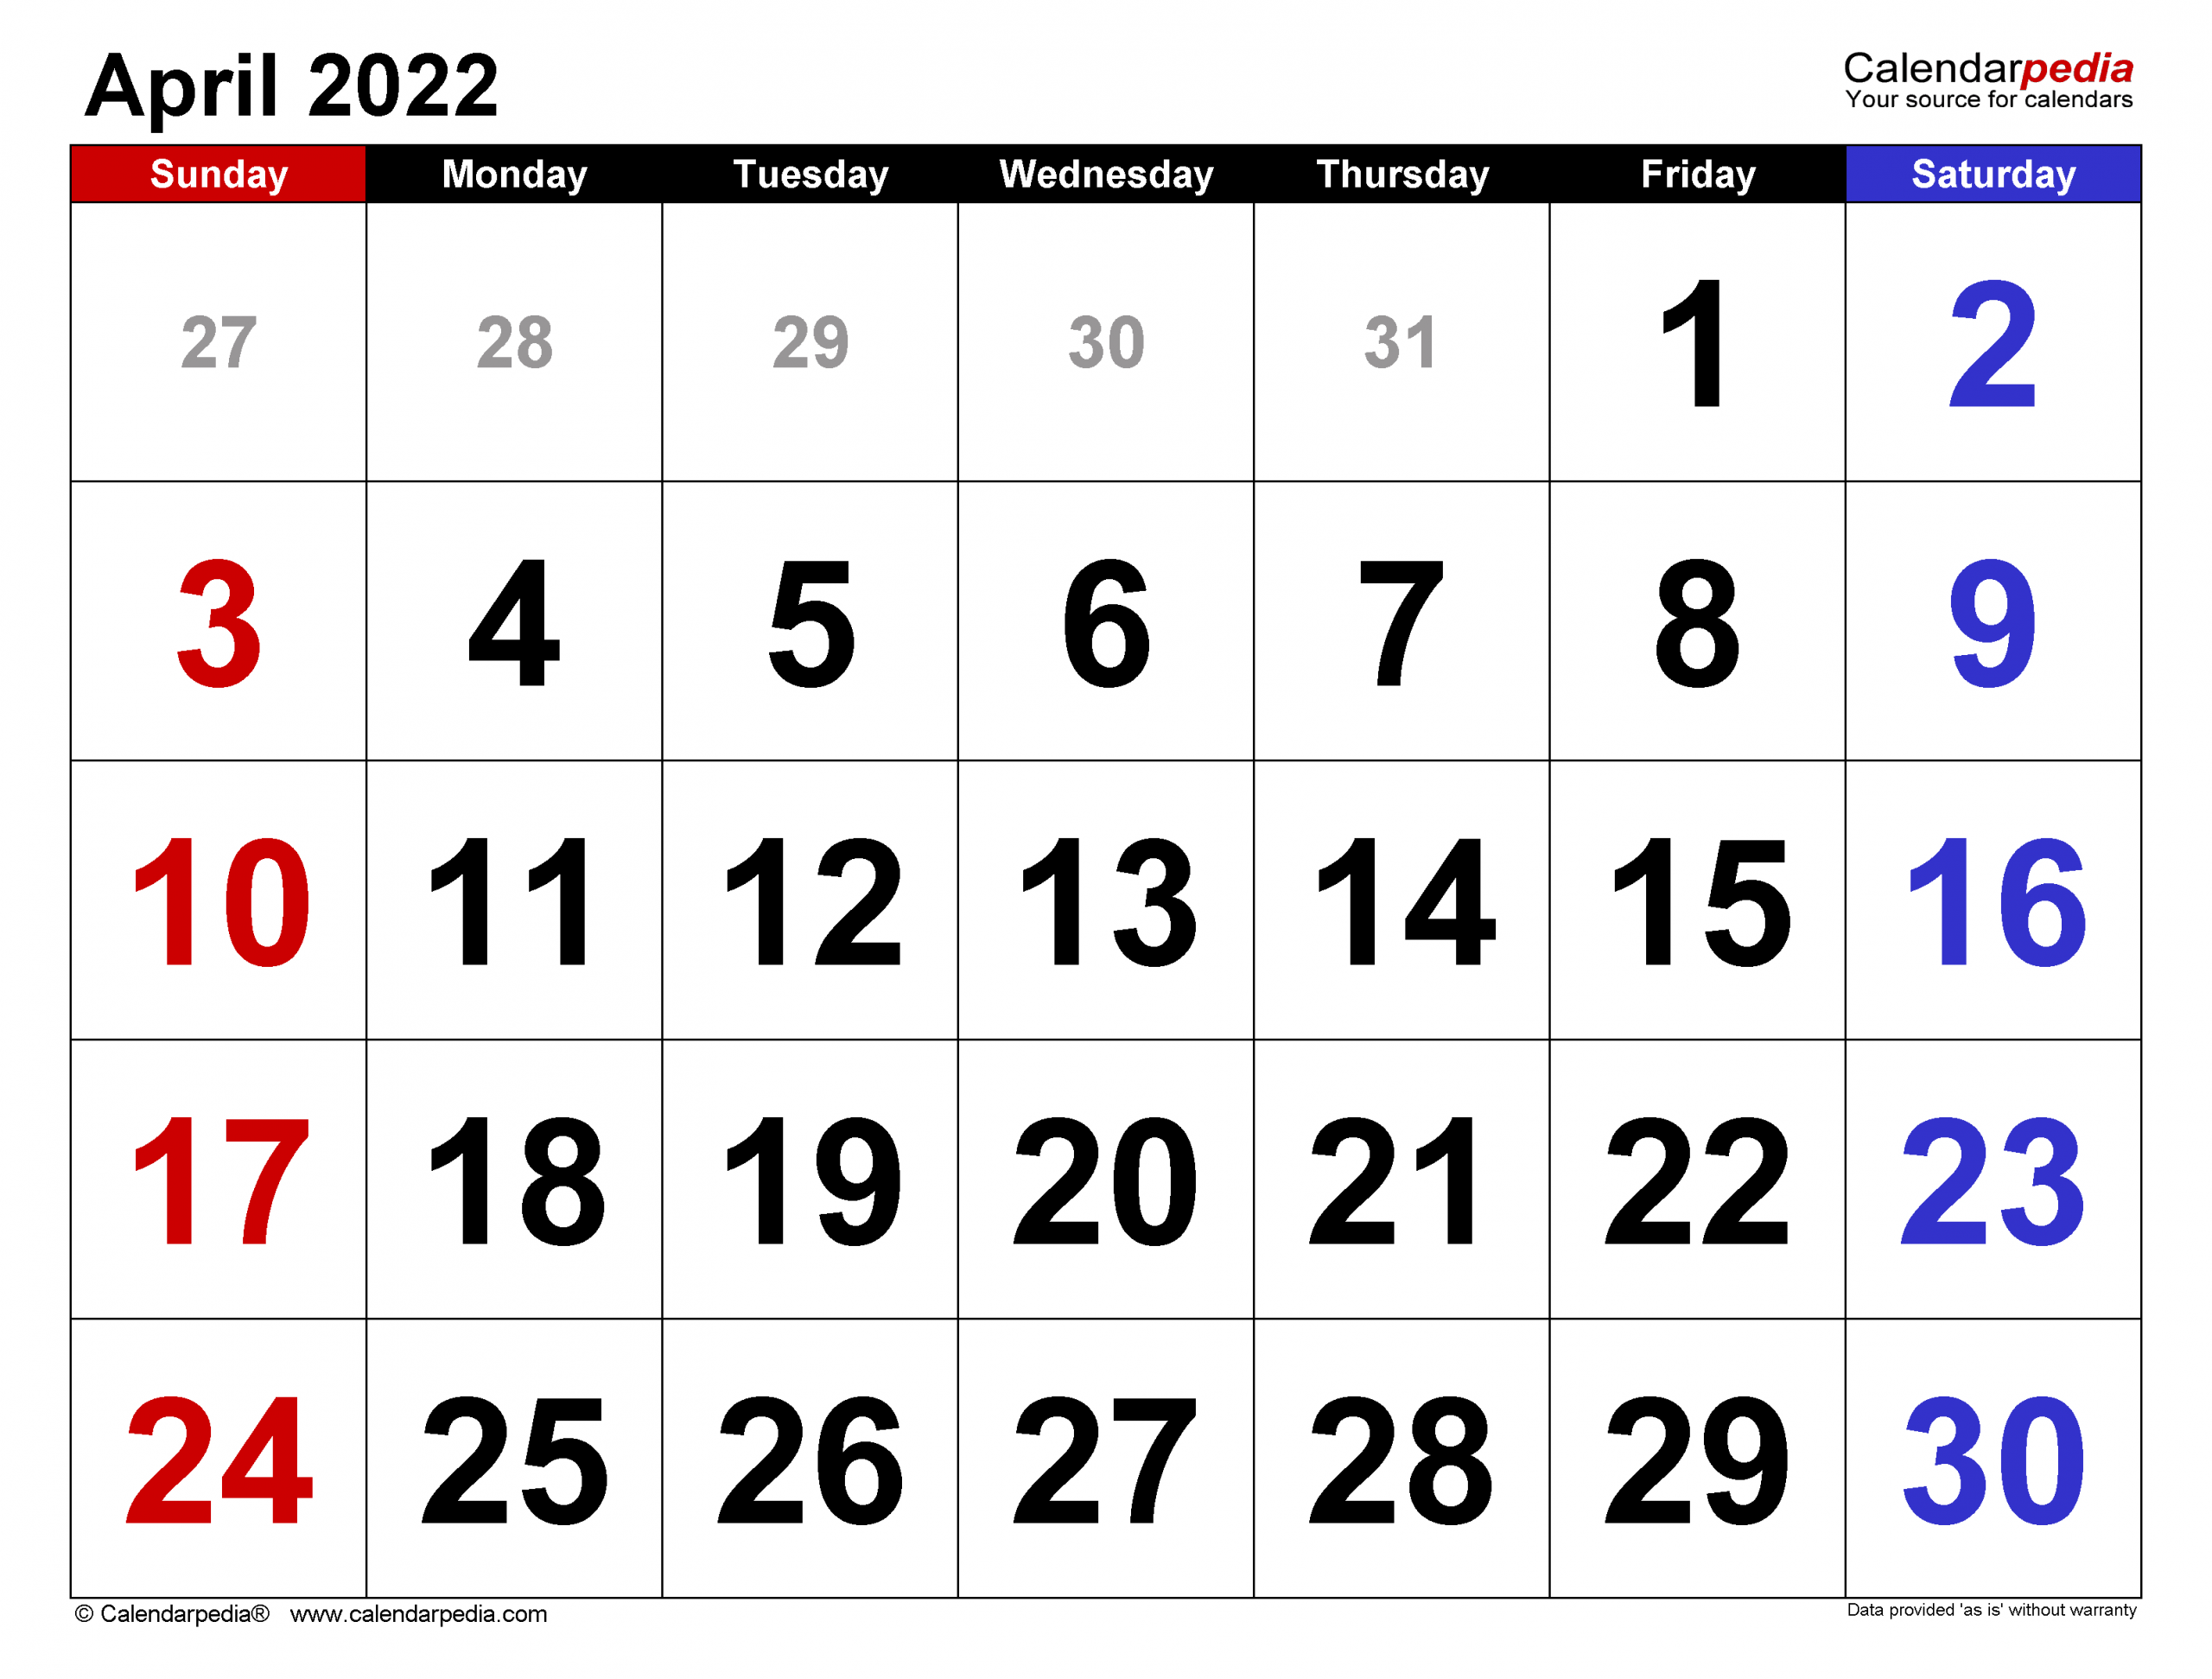 April 2022 Calendar | Templates For Word, Excel And Pdf